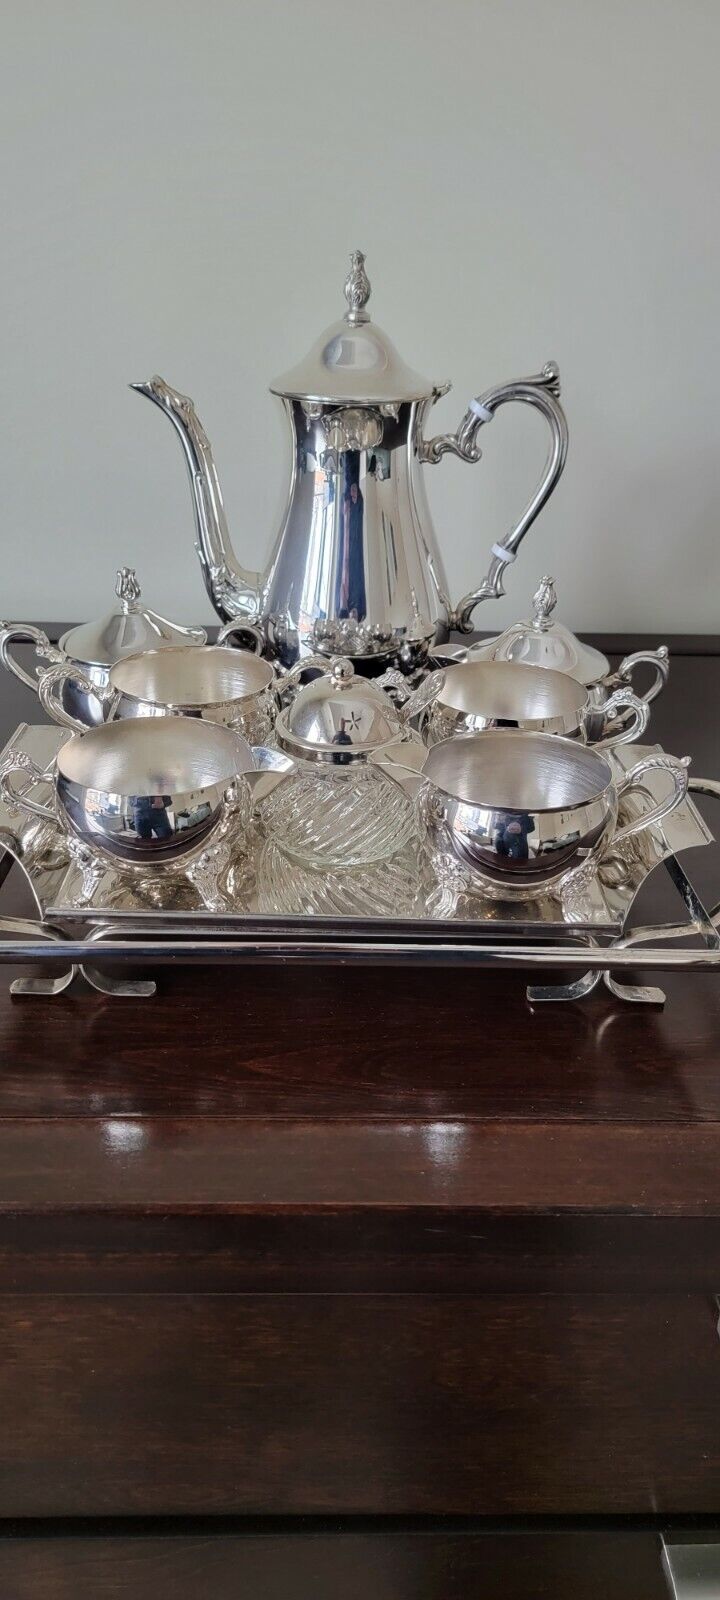 15 PIECE COMPLETE COFFEE TEA SILVER PLATED SET KETTLE CUP TRAY CREAM SUGAR SPOON